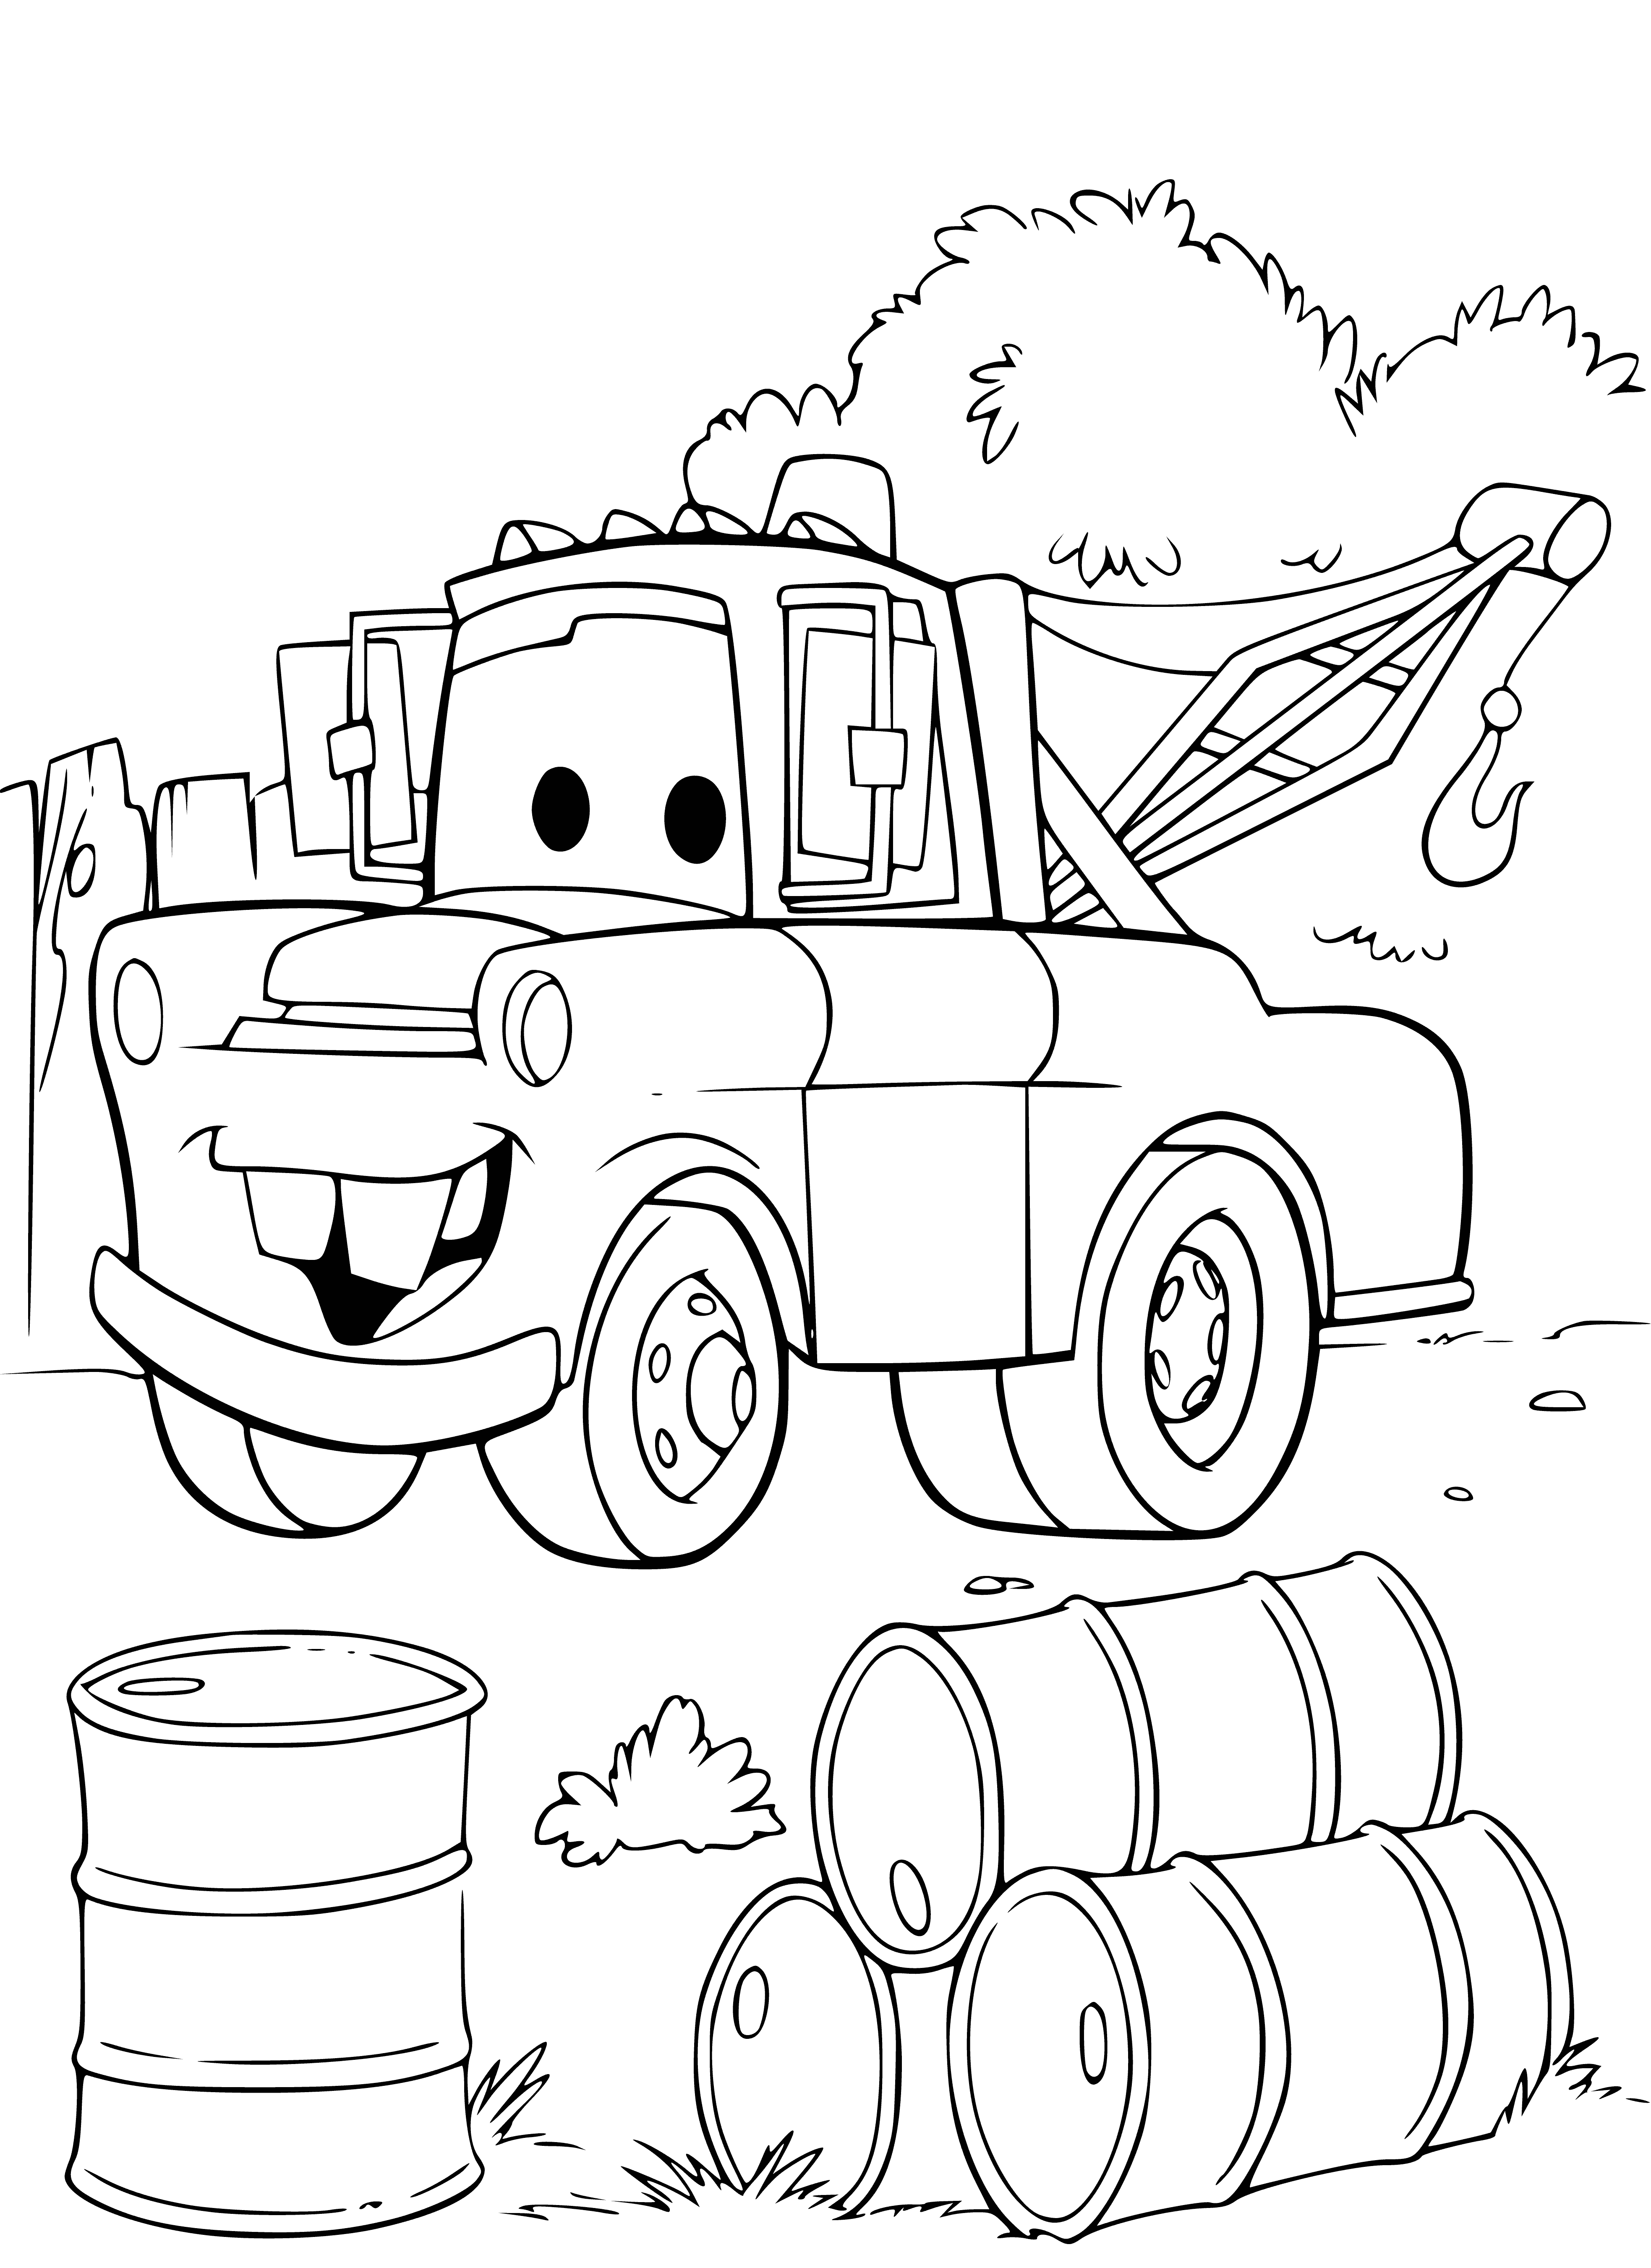 coloring page: Robot rides in a blue GMC pick-up down a dirt road, smiling and waving its one large blue eye.